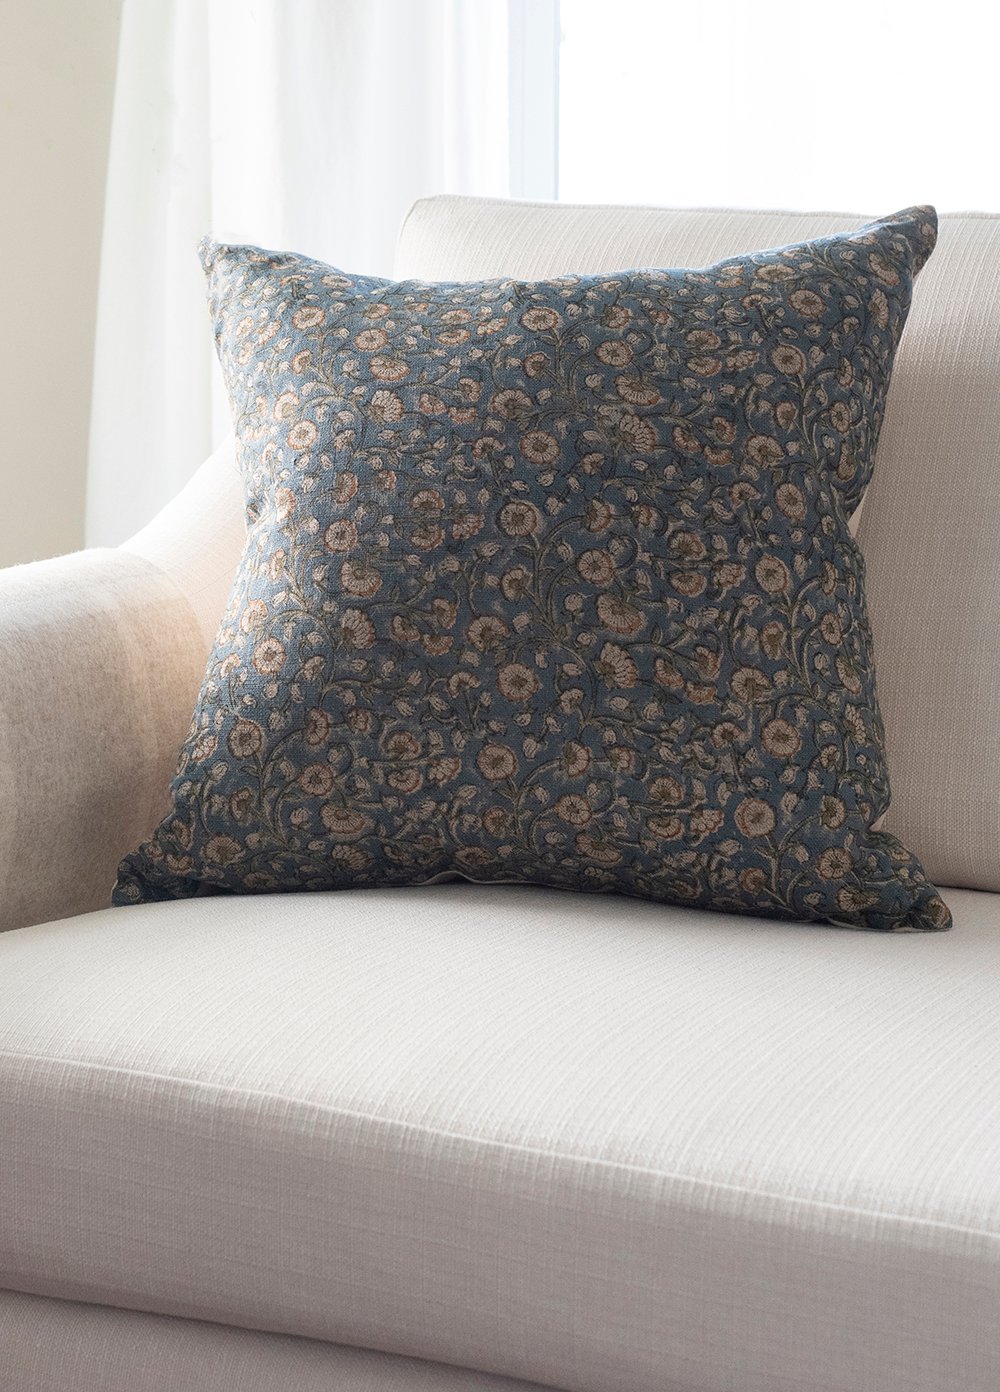 Best of Etsy : Block Print Pillows - roomfortuesday.com